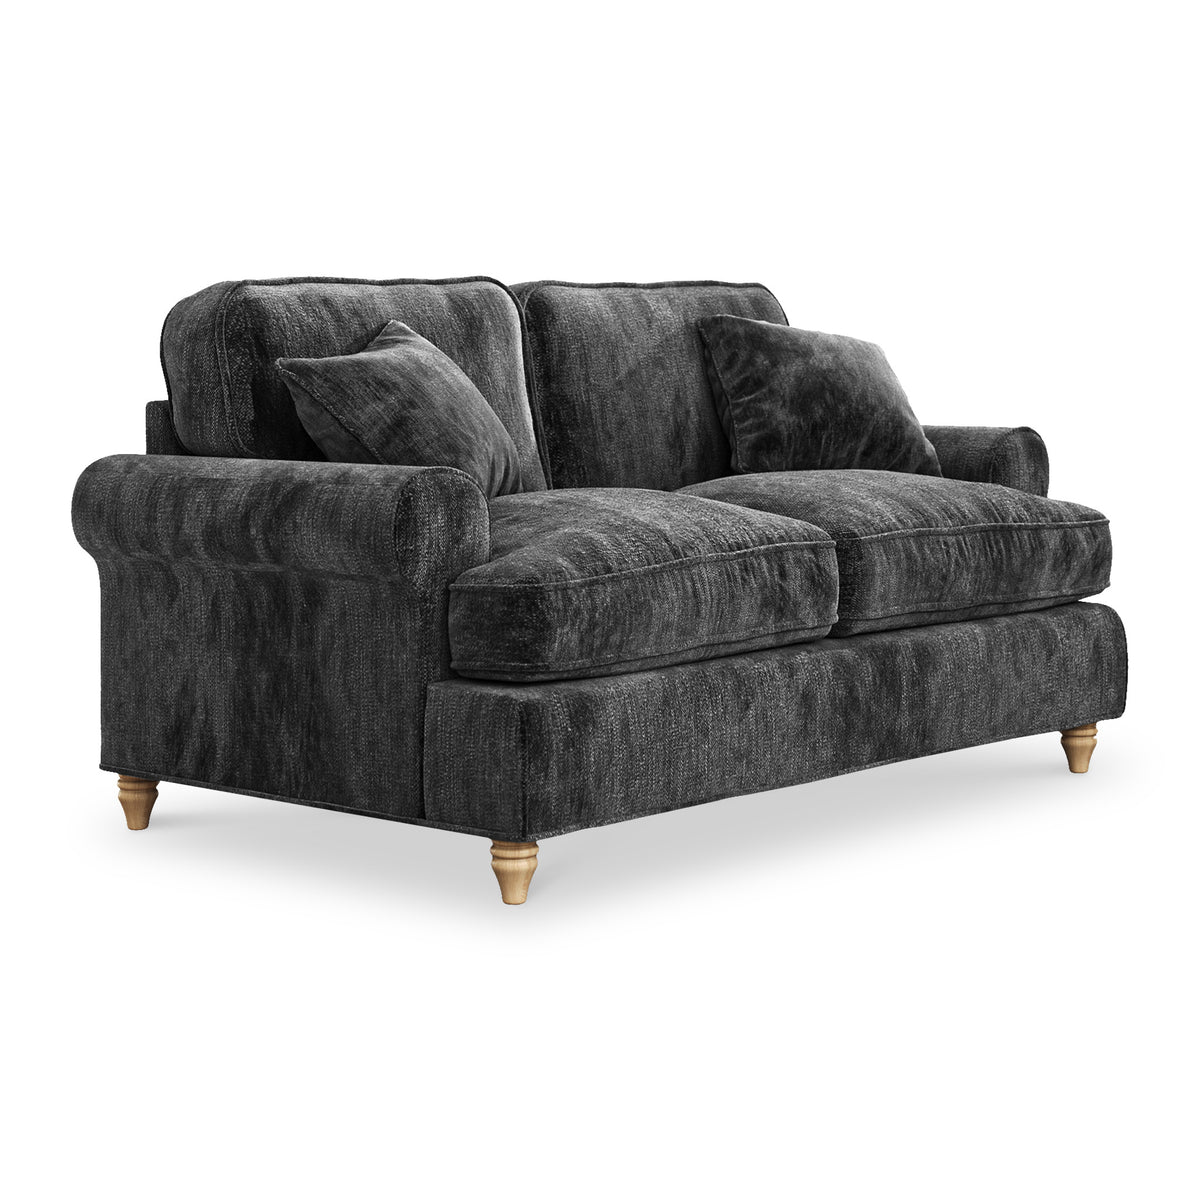 Alfie Charcoal Grey 2 Seater Sofa from Roseland Furniture